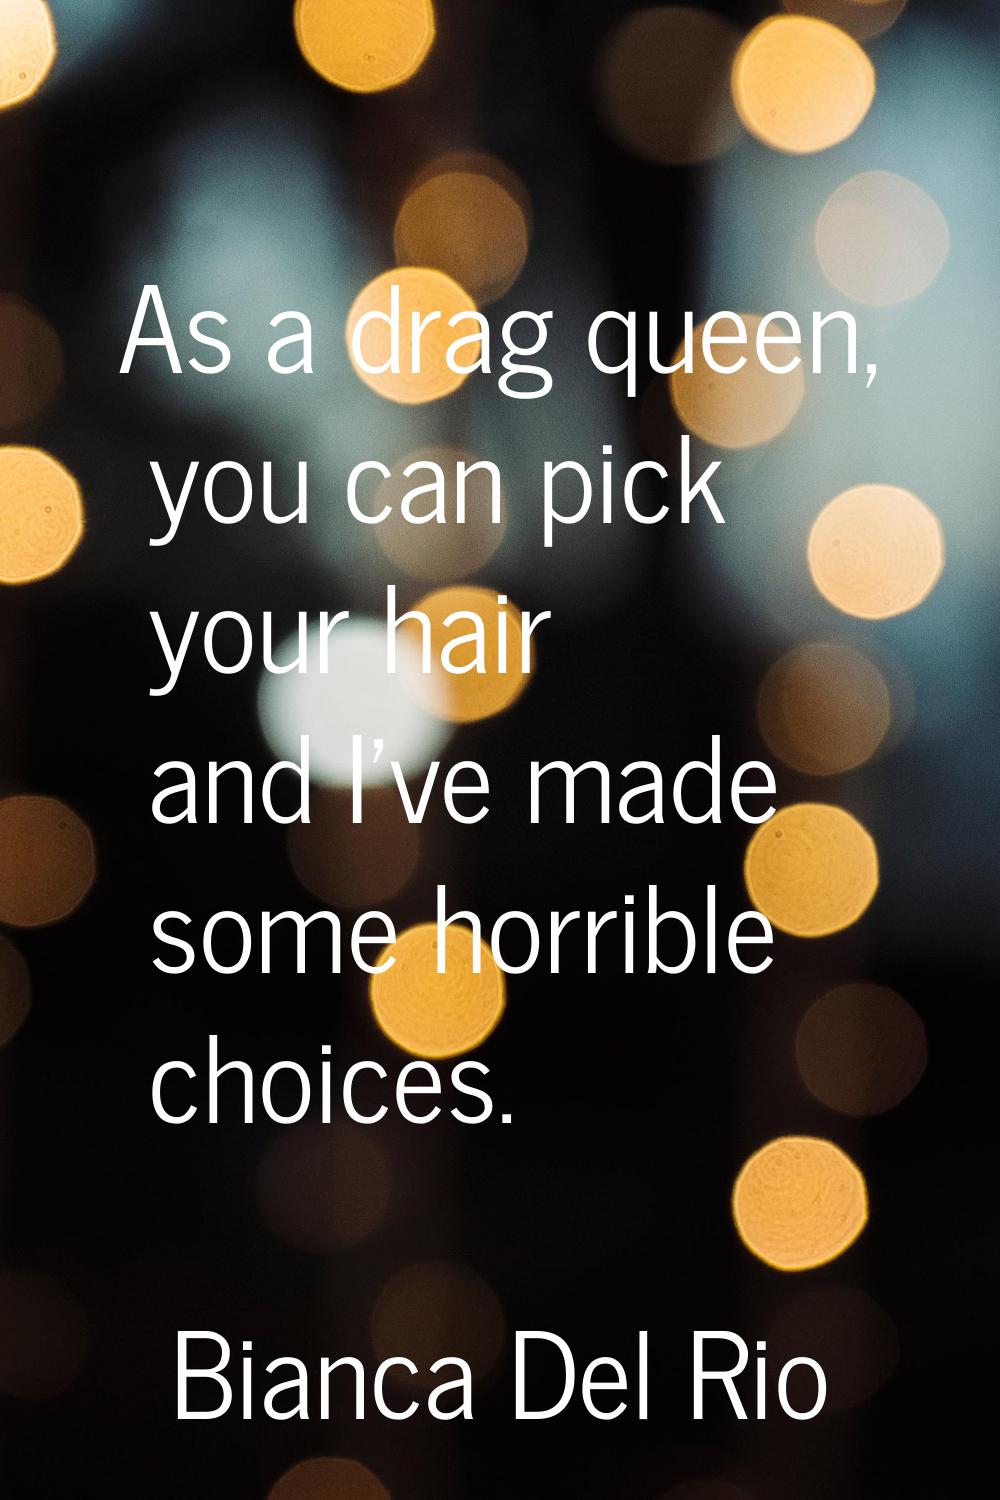 As a drag queen, you can pick your hair and I've made some horrible choices.